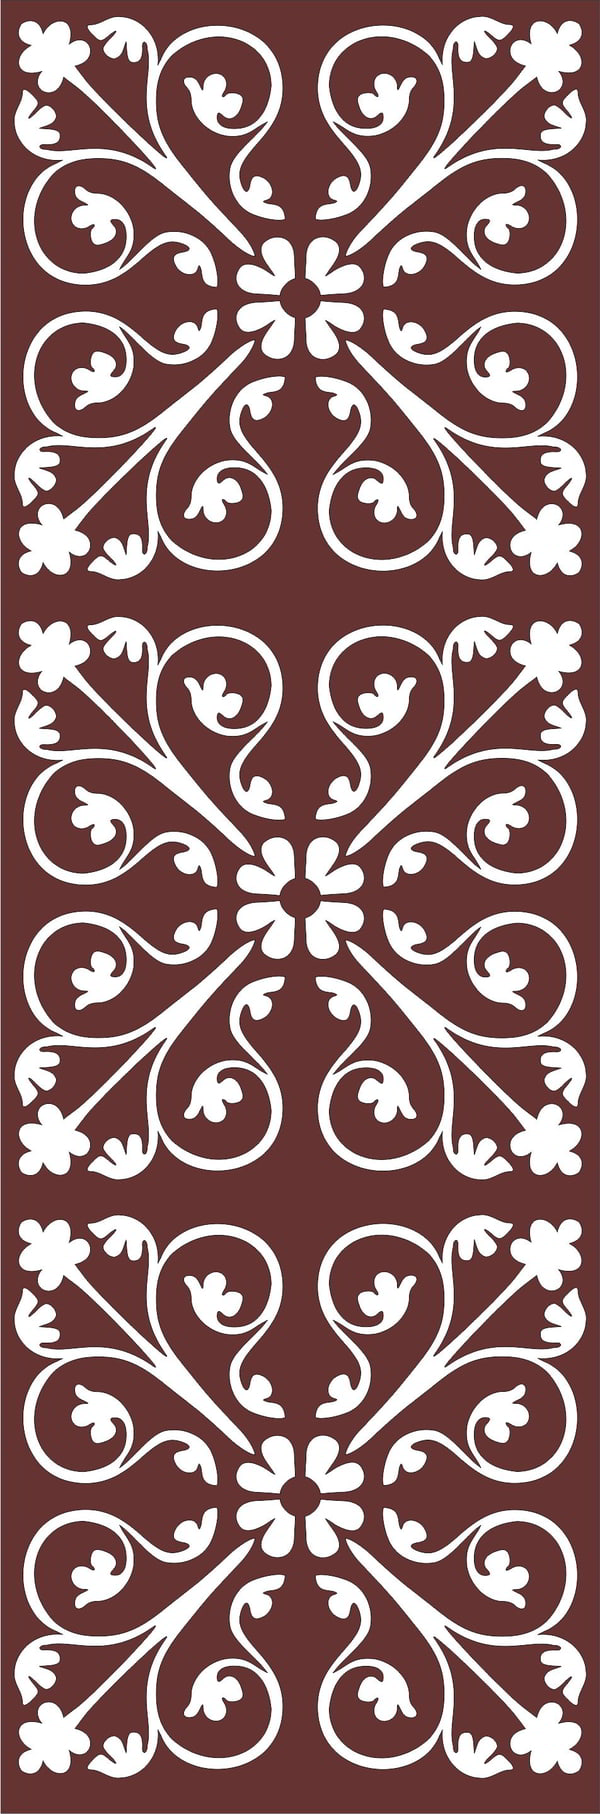 Laser Cut Decor Seamless Separator Floral Grill Download Free Vector